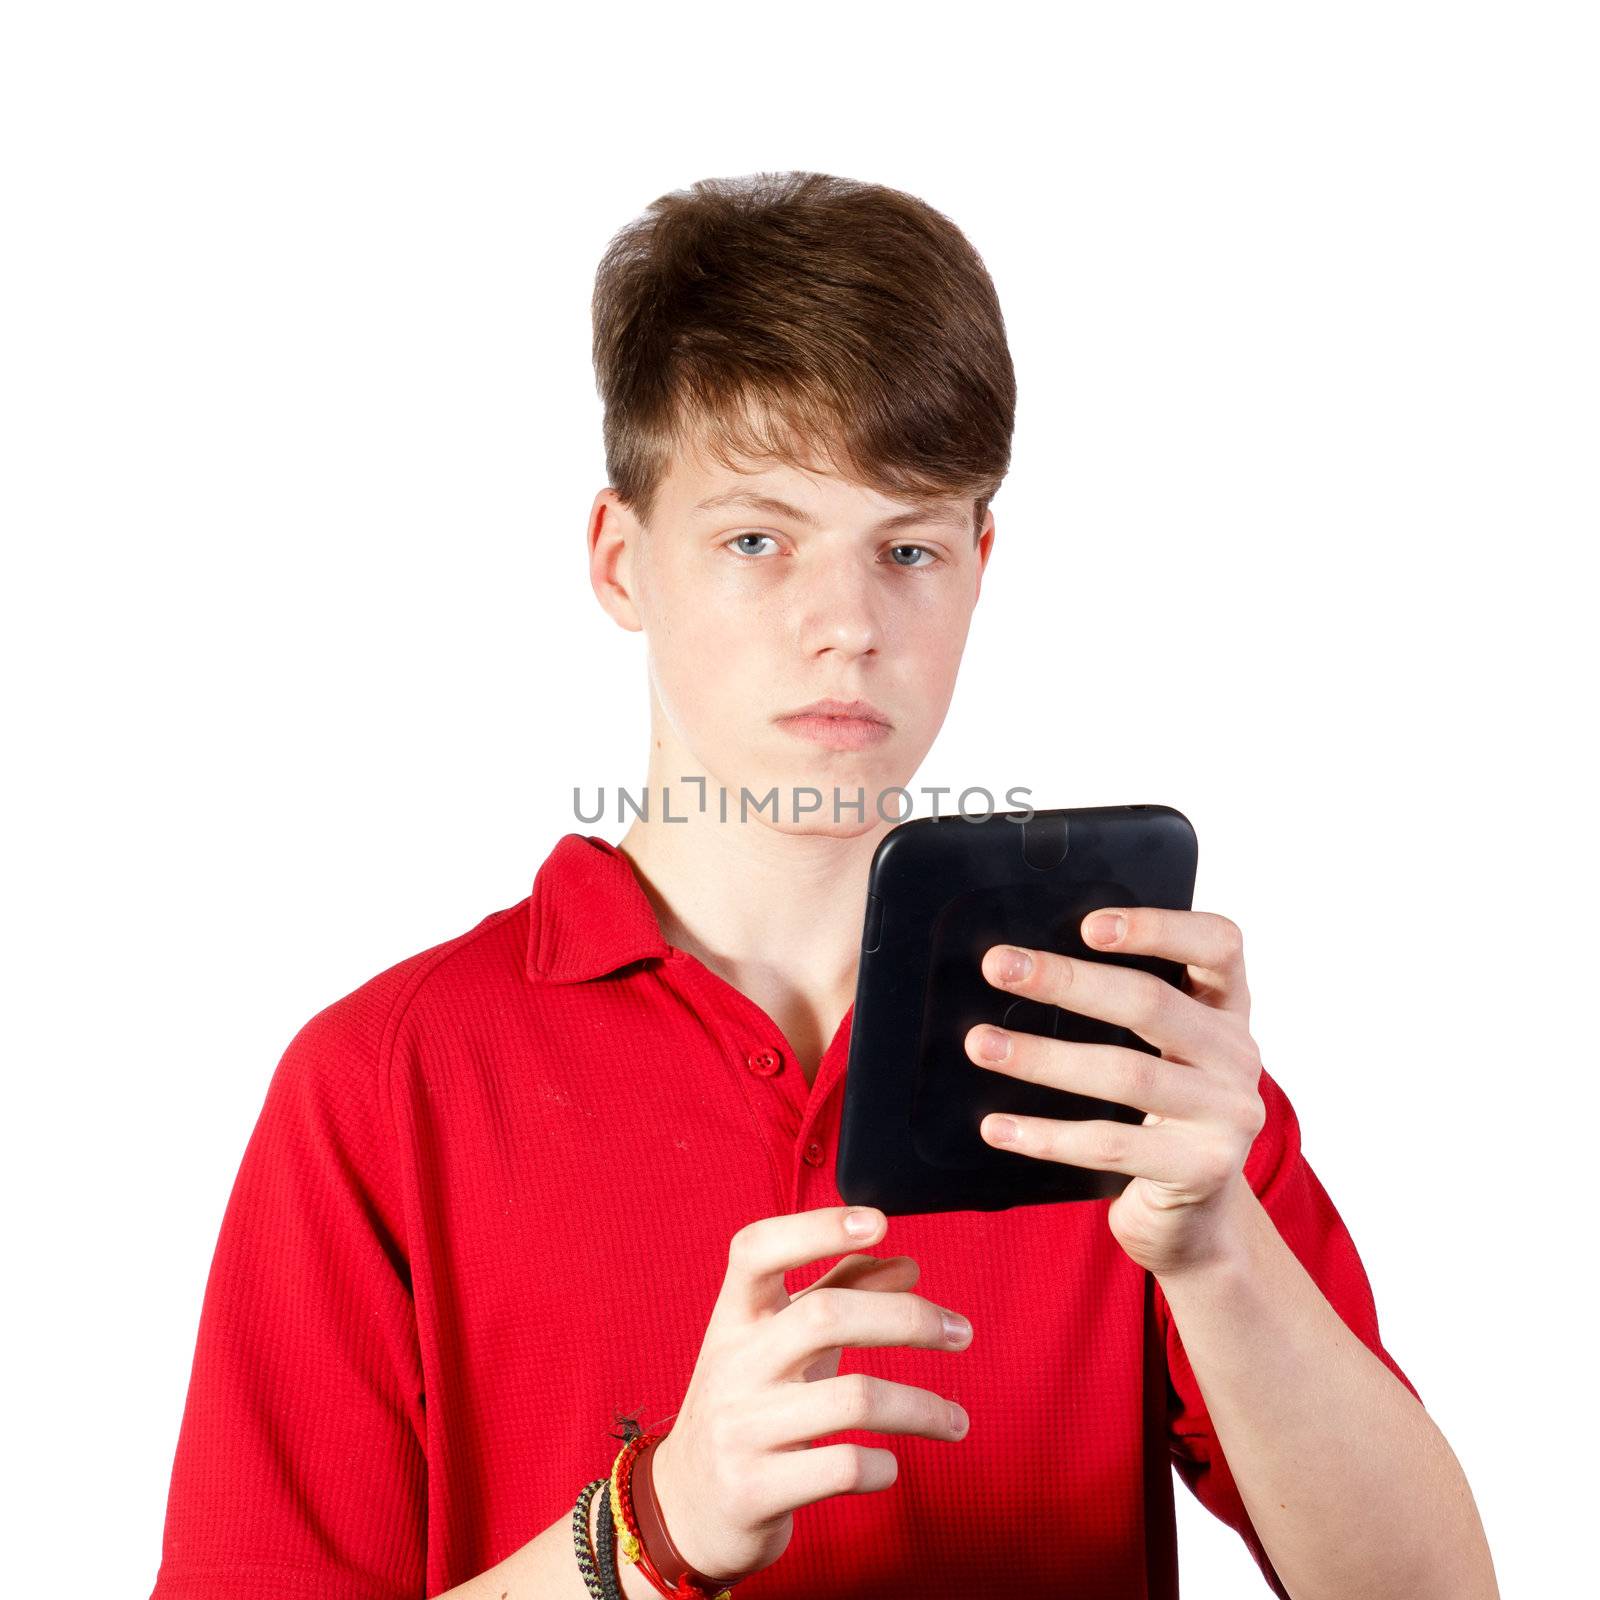 Teenager using ebook reader or tablet pc on a white background